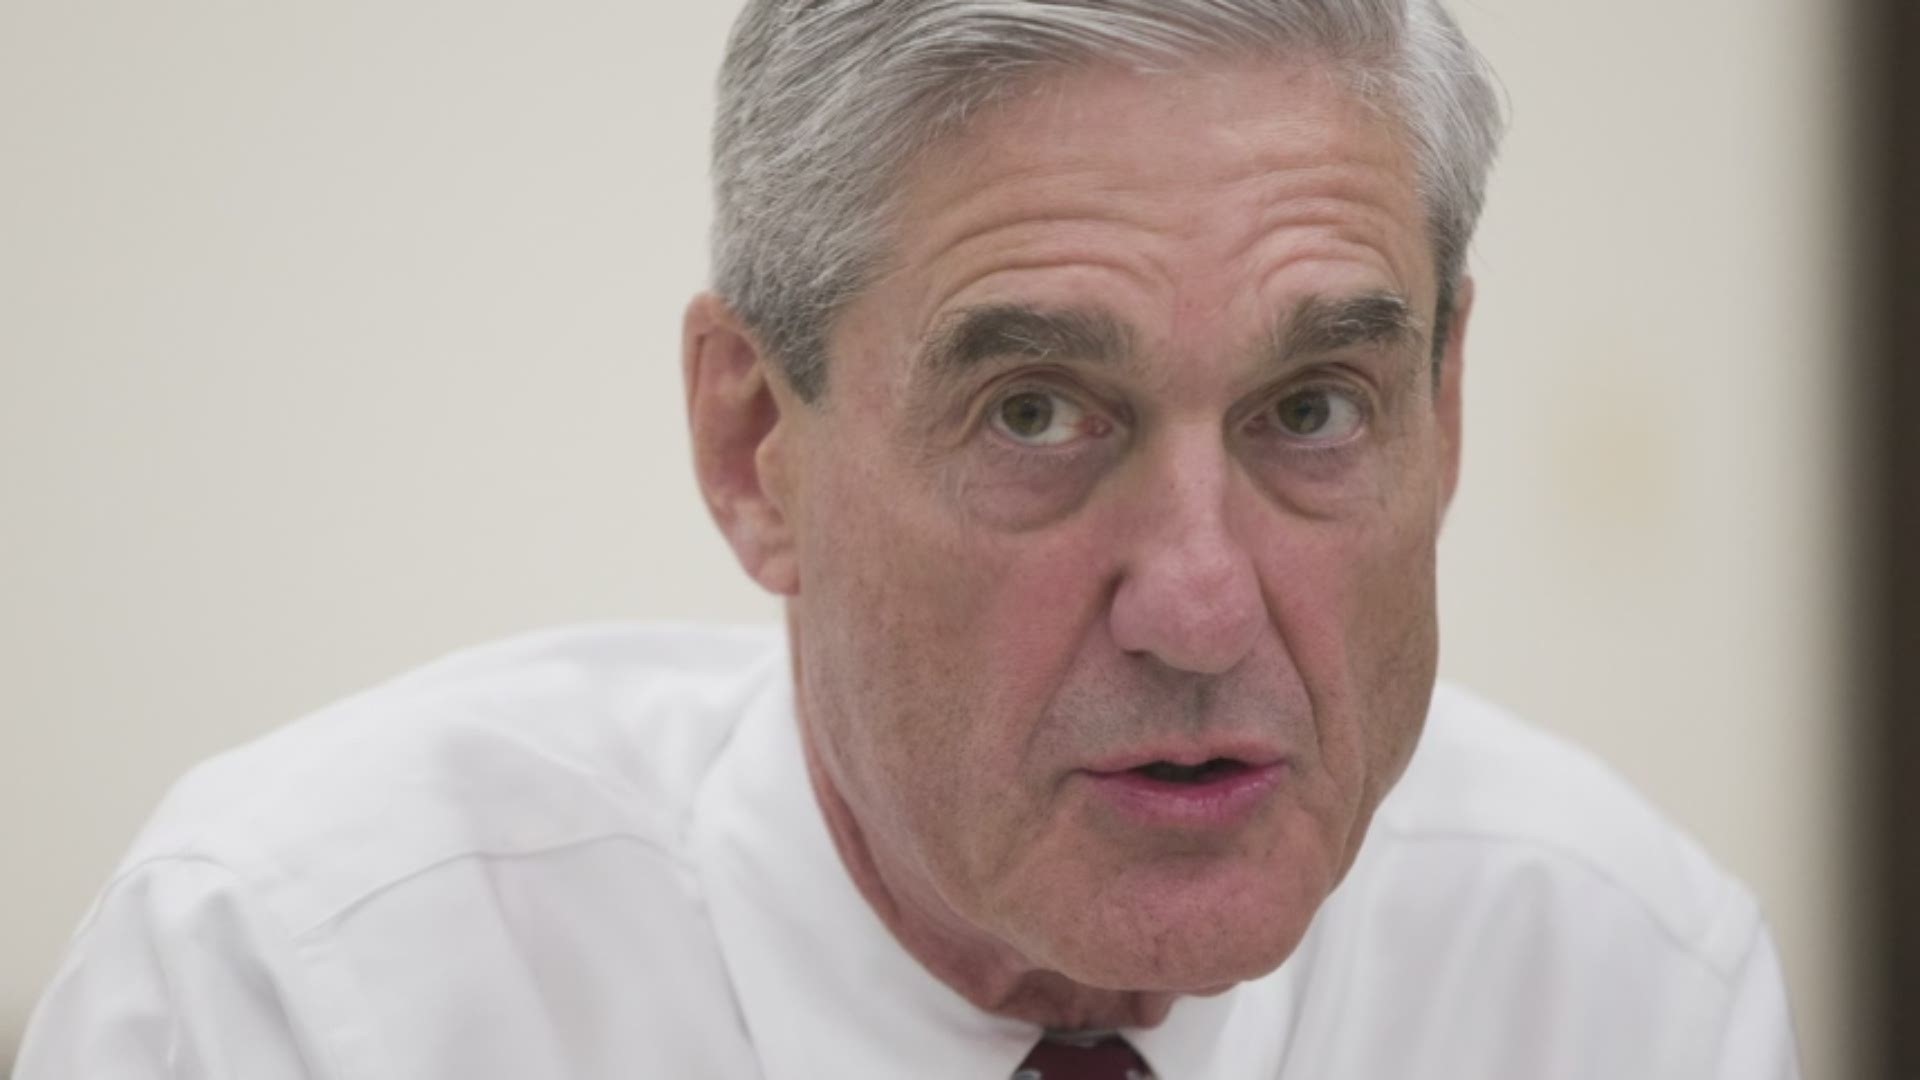 Here's what to watch for when Special Counsel Robert Mueller delivers his report to Attorney General William Barr. (AP)